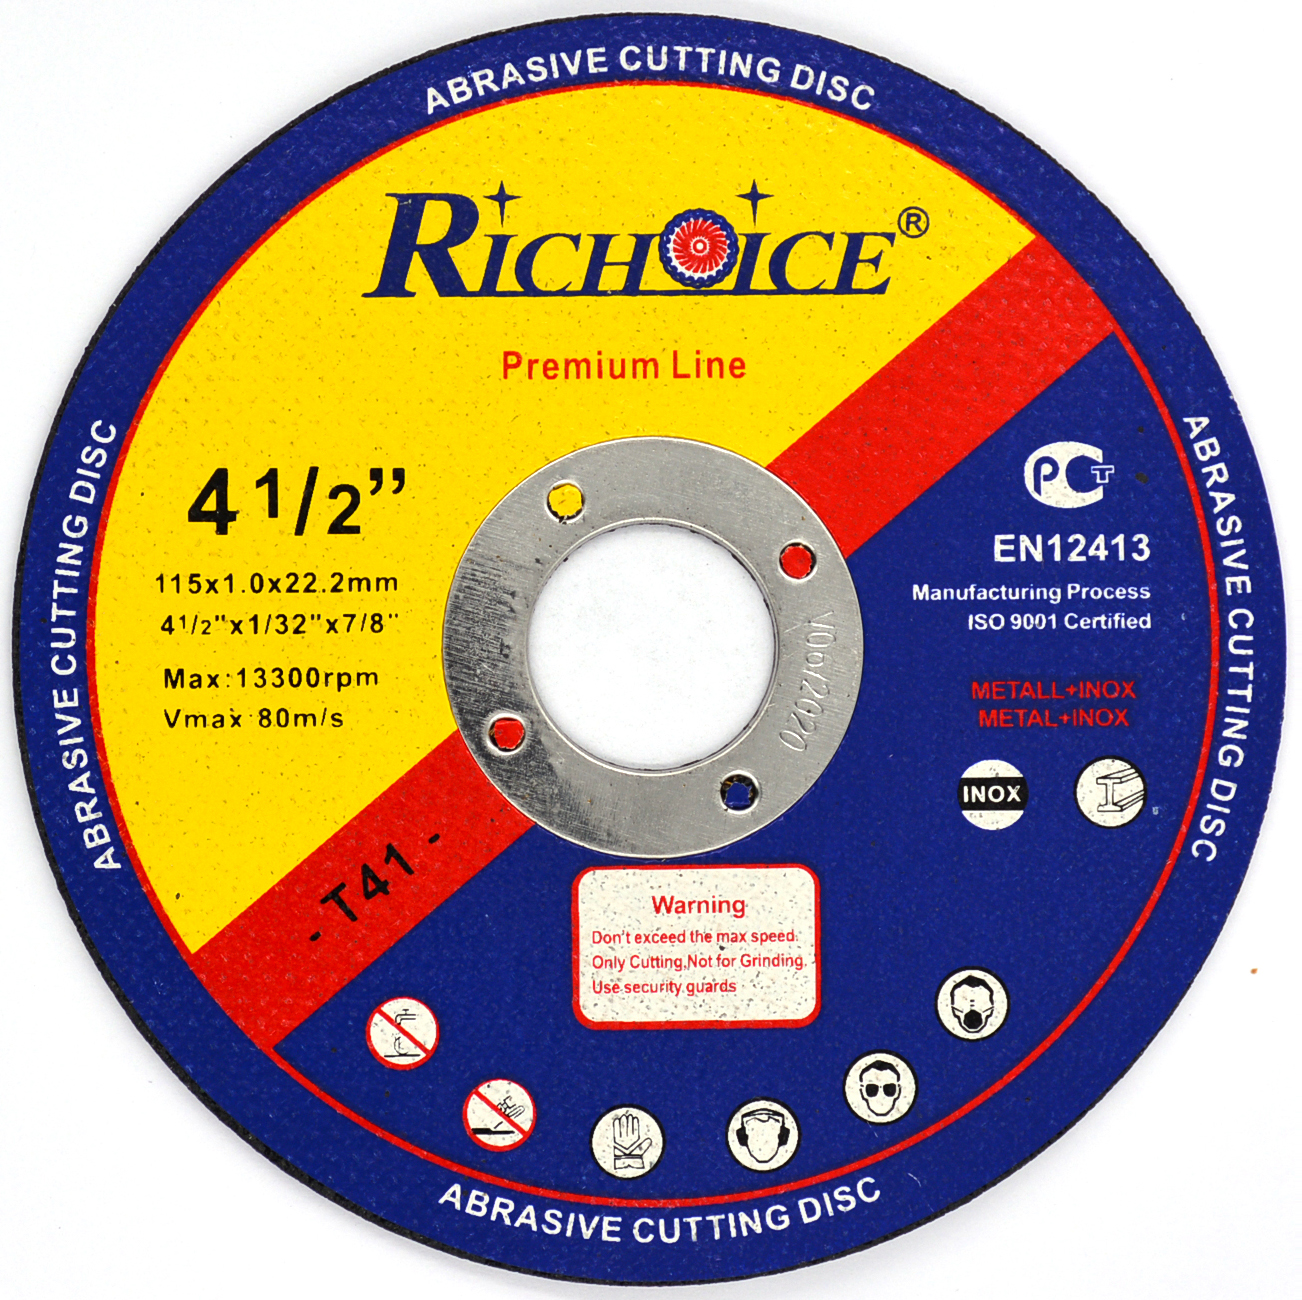  Richoice Abrasive Cutting Disc for Metal & Stainless Steel 2 in 1